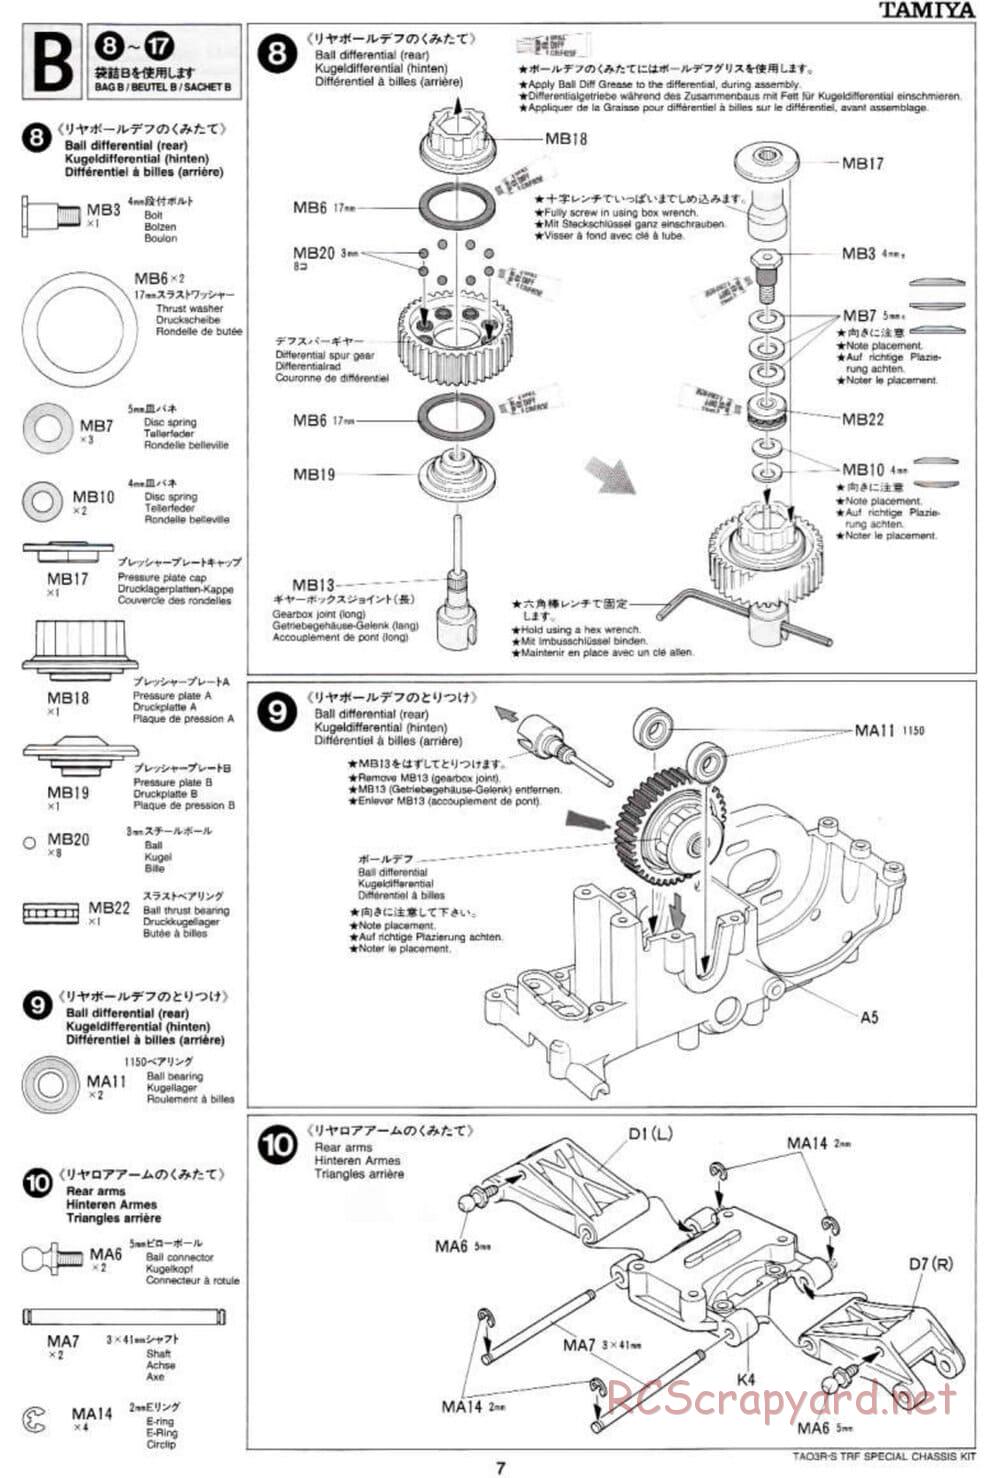 Tamiya - TA-03RS TRF Special Chassis - Manual - Page 7